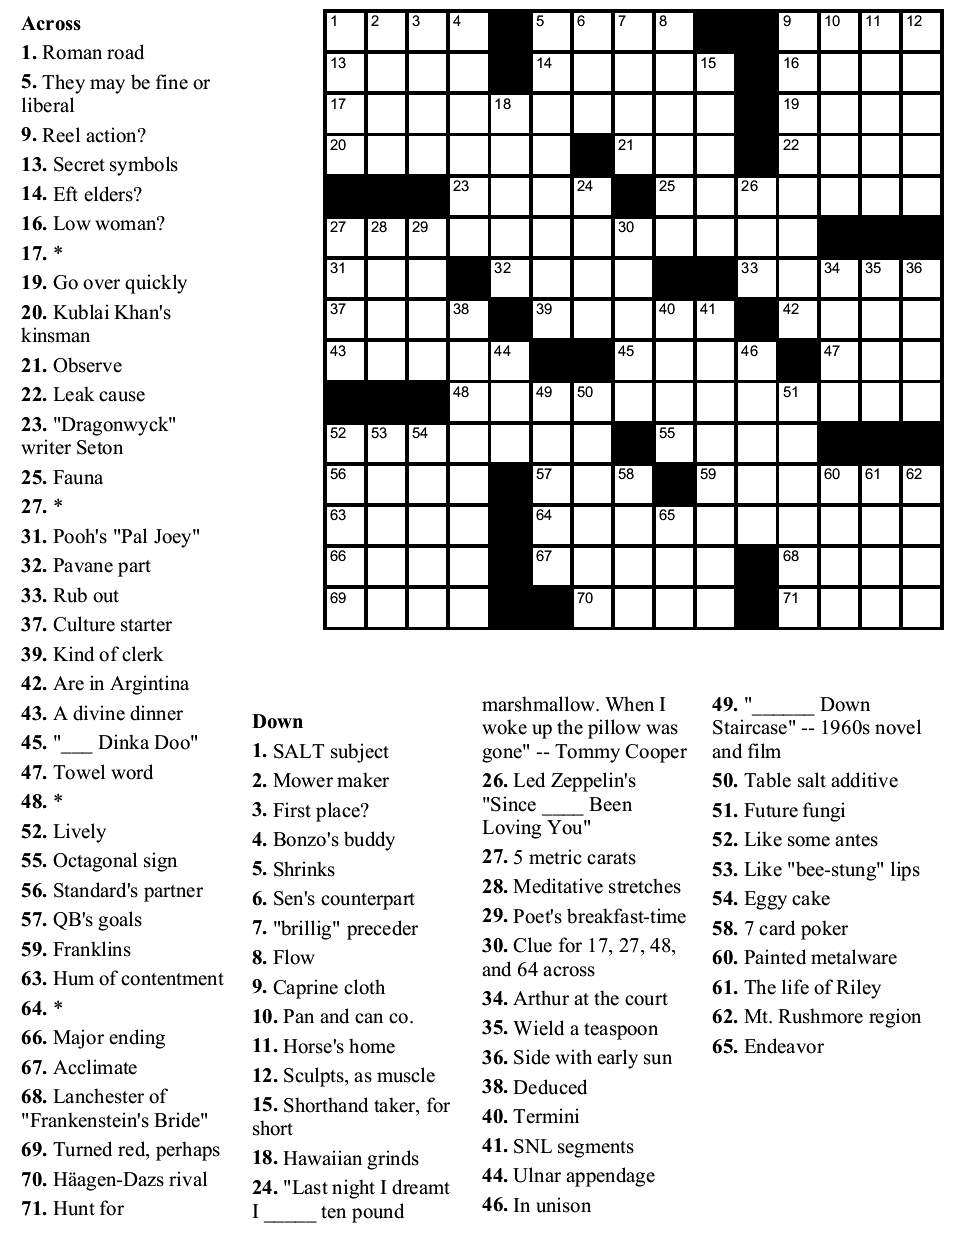 Easy Crossword Puzzles Printable Daily Template - Printable Crossword Puzzles 2019